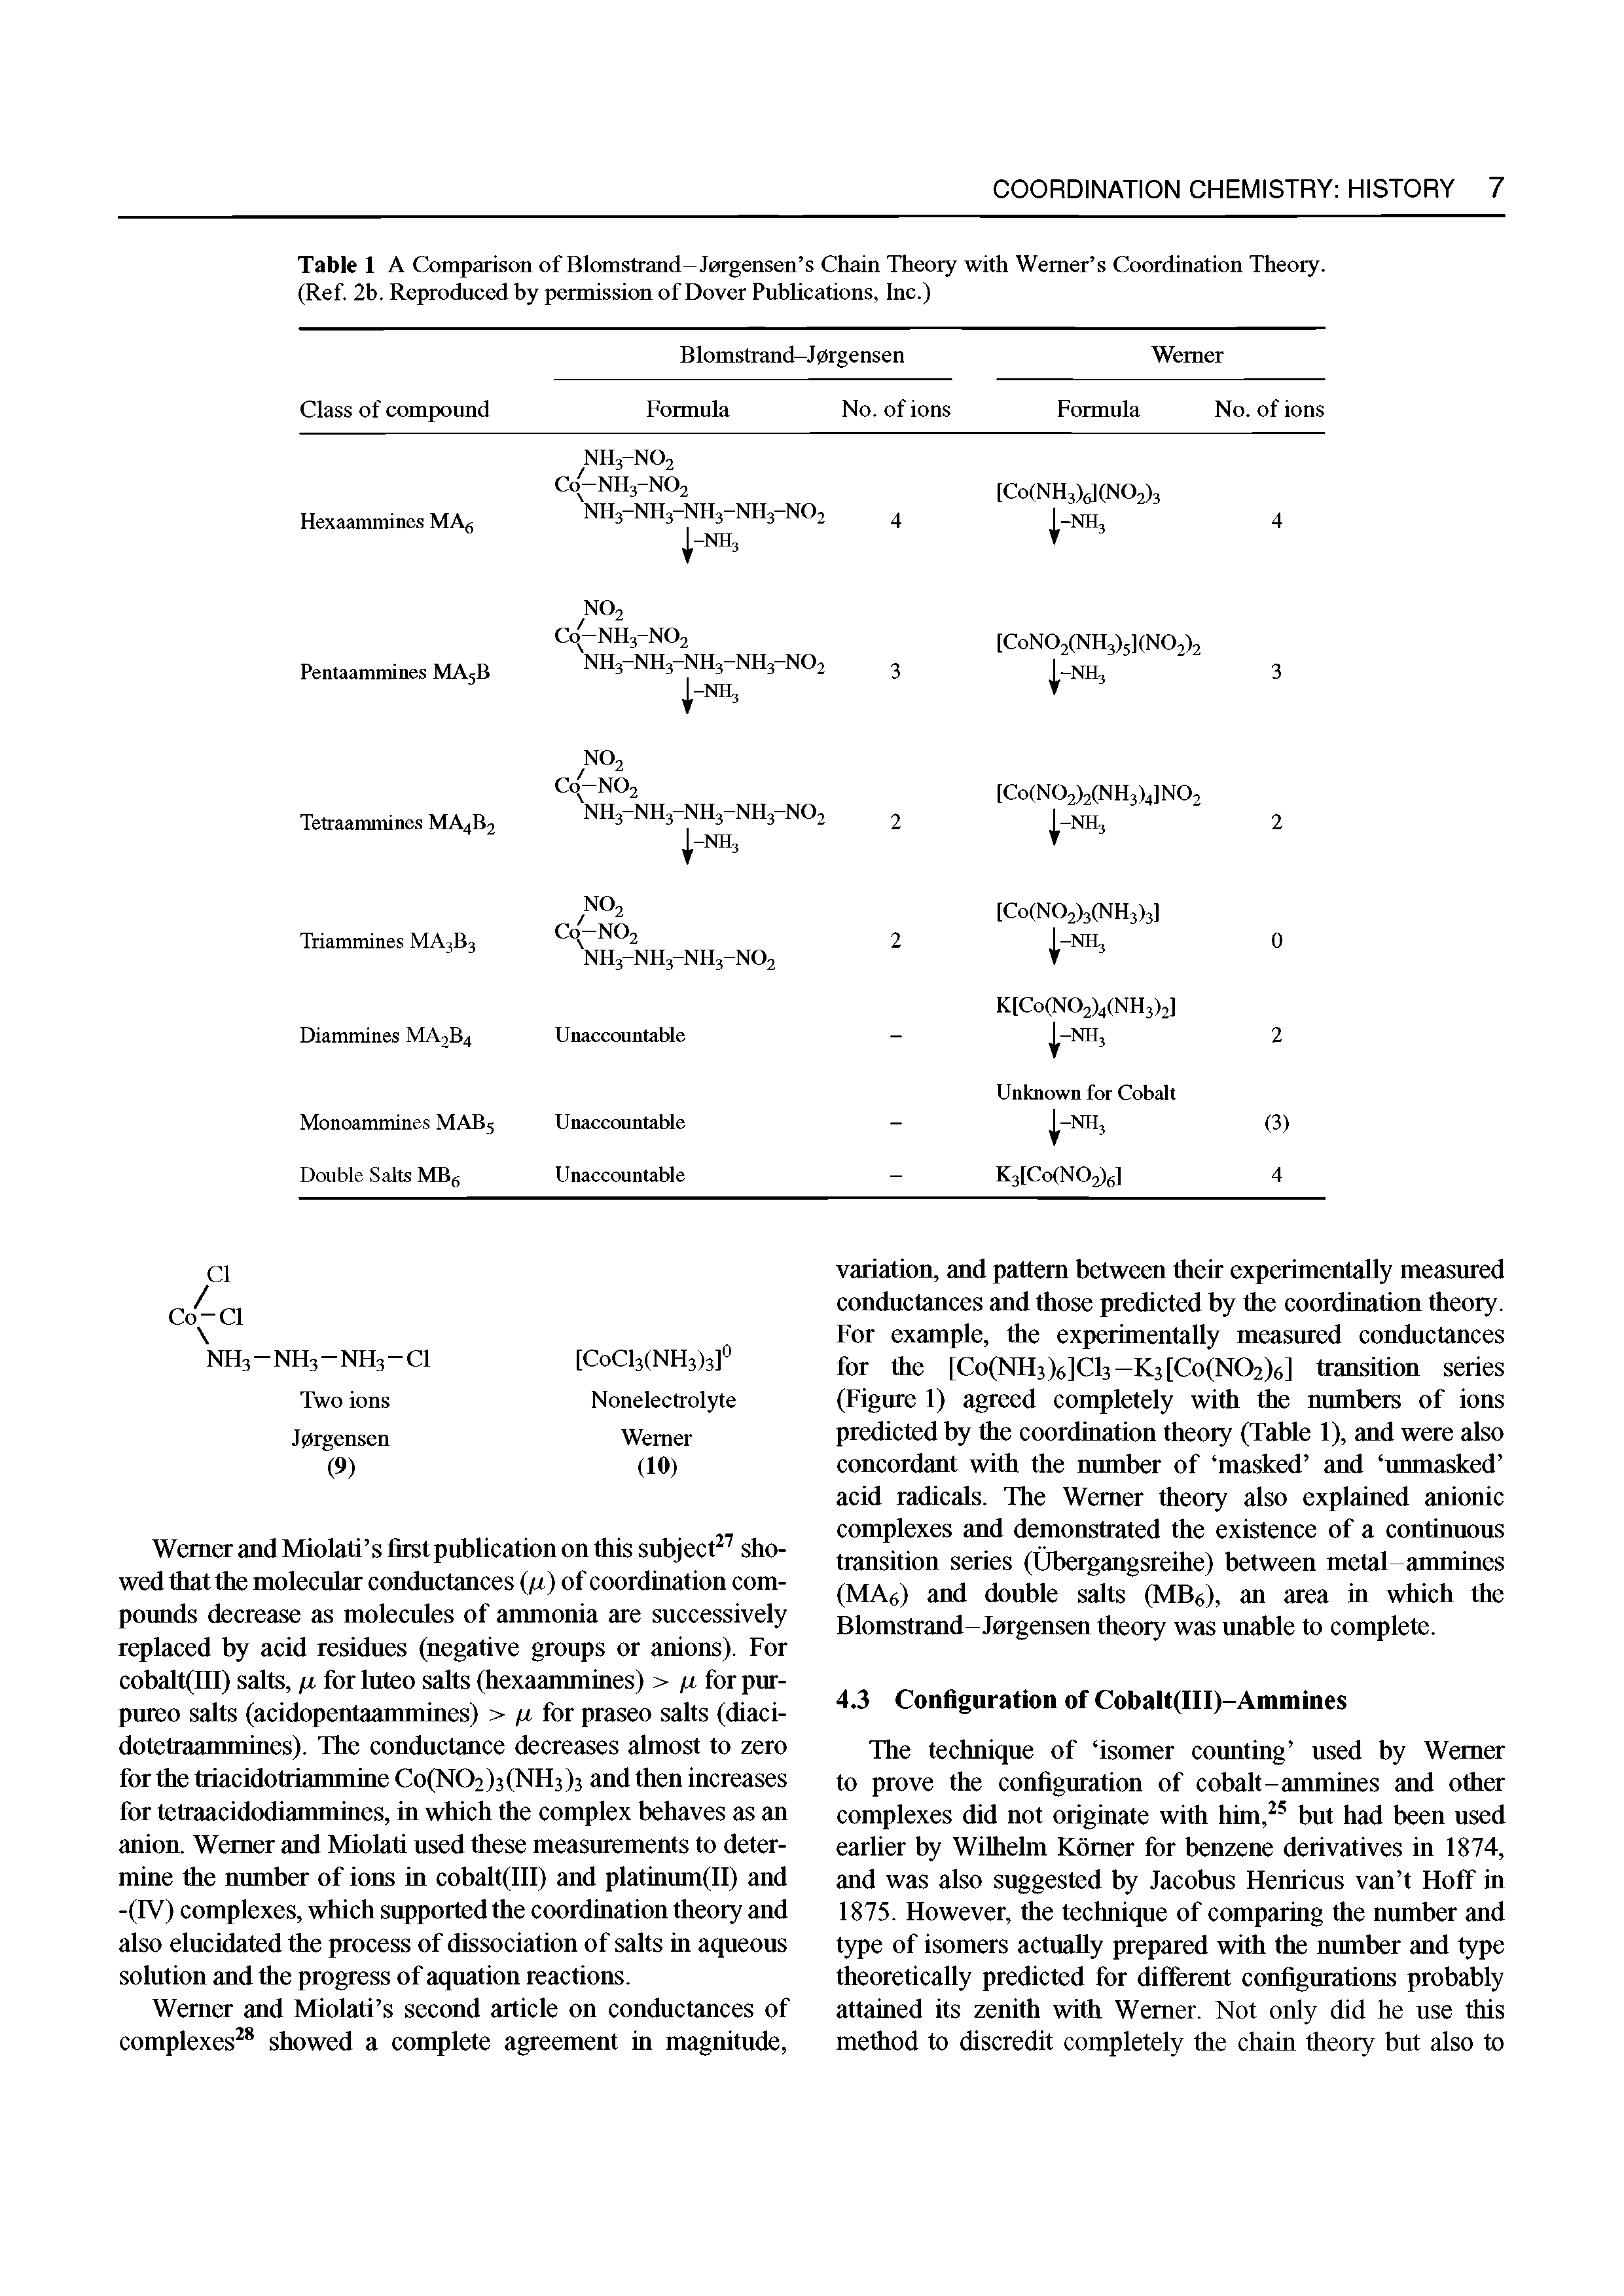 Table 1 A Comparison of Blomstrand-Jorgensen s Chain Theory with Werner s Coordination Theory. (Ref. 2b. Reproduced by permission of Dover Publications, Inc.)...